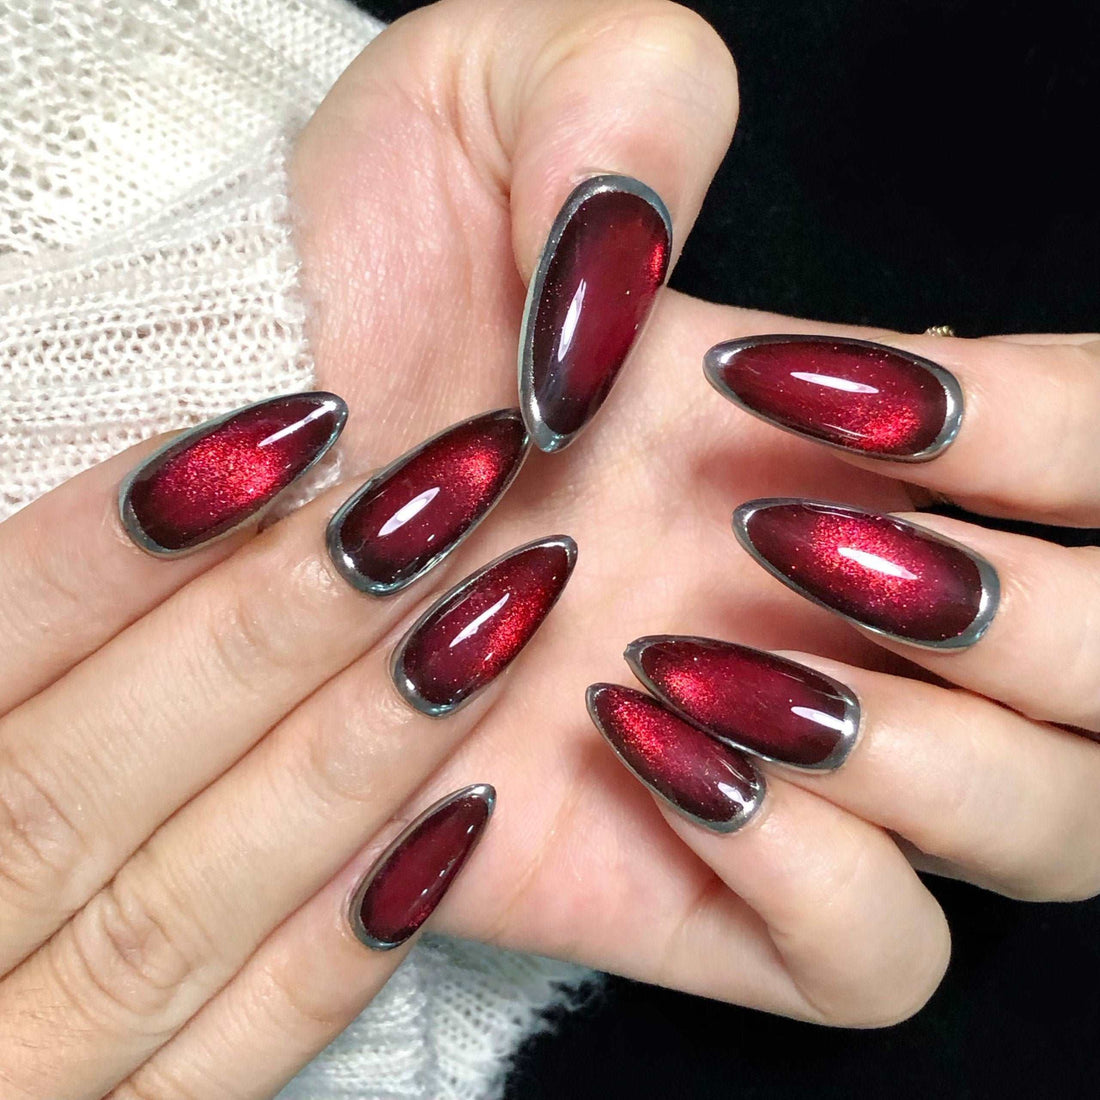 Handmade Magic Cat Eye Press on Nails - Red & Silver Aura Effect Ombre Design.